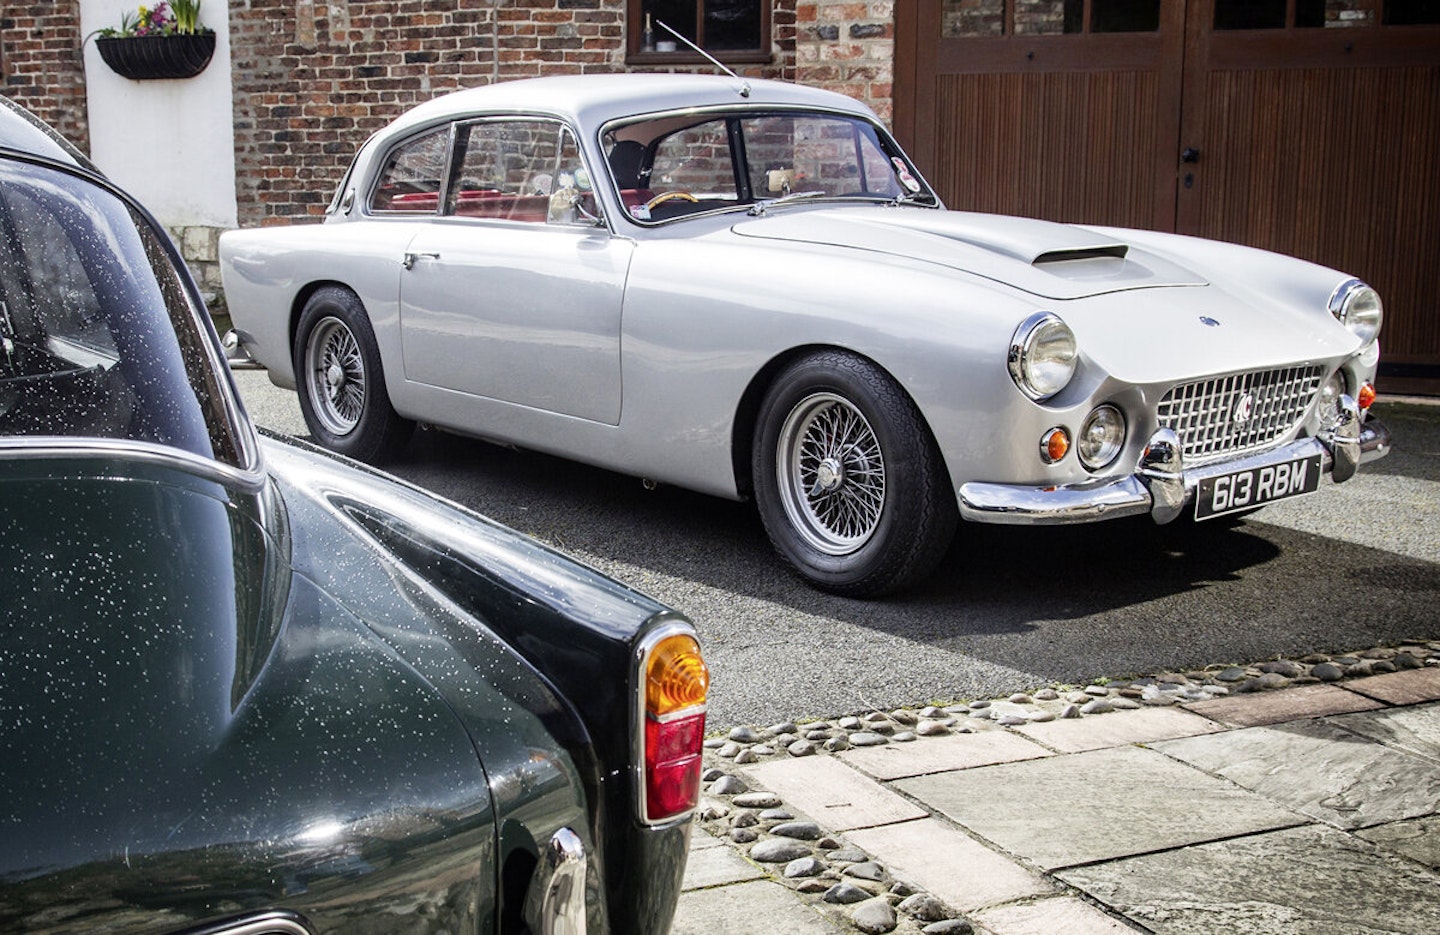 Silver AC Greyhound is Bristol-powered; the green one has a Ford Zephyr engine